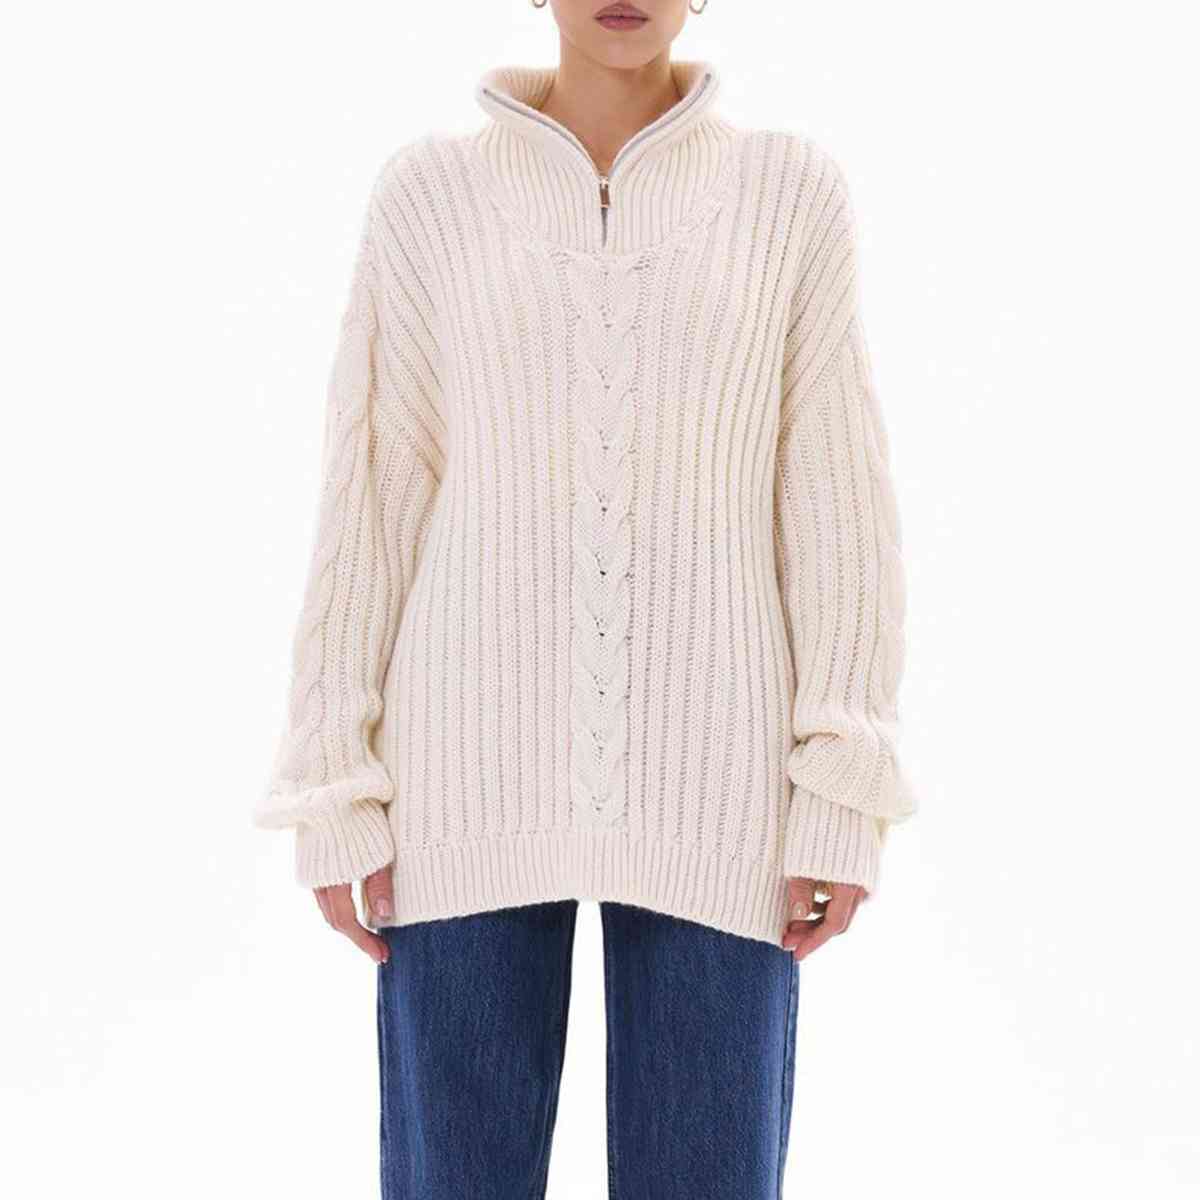 Ribbed Half Zip Long Sleeve Sweater - White / S - Sweaters - Shirts & Tops - 8 - 2024